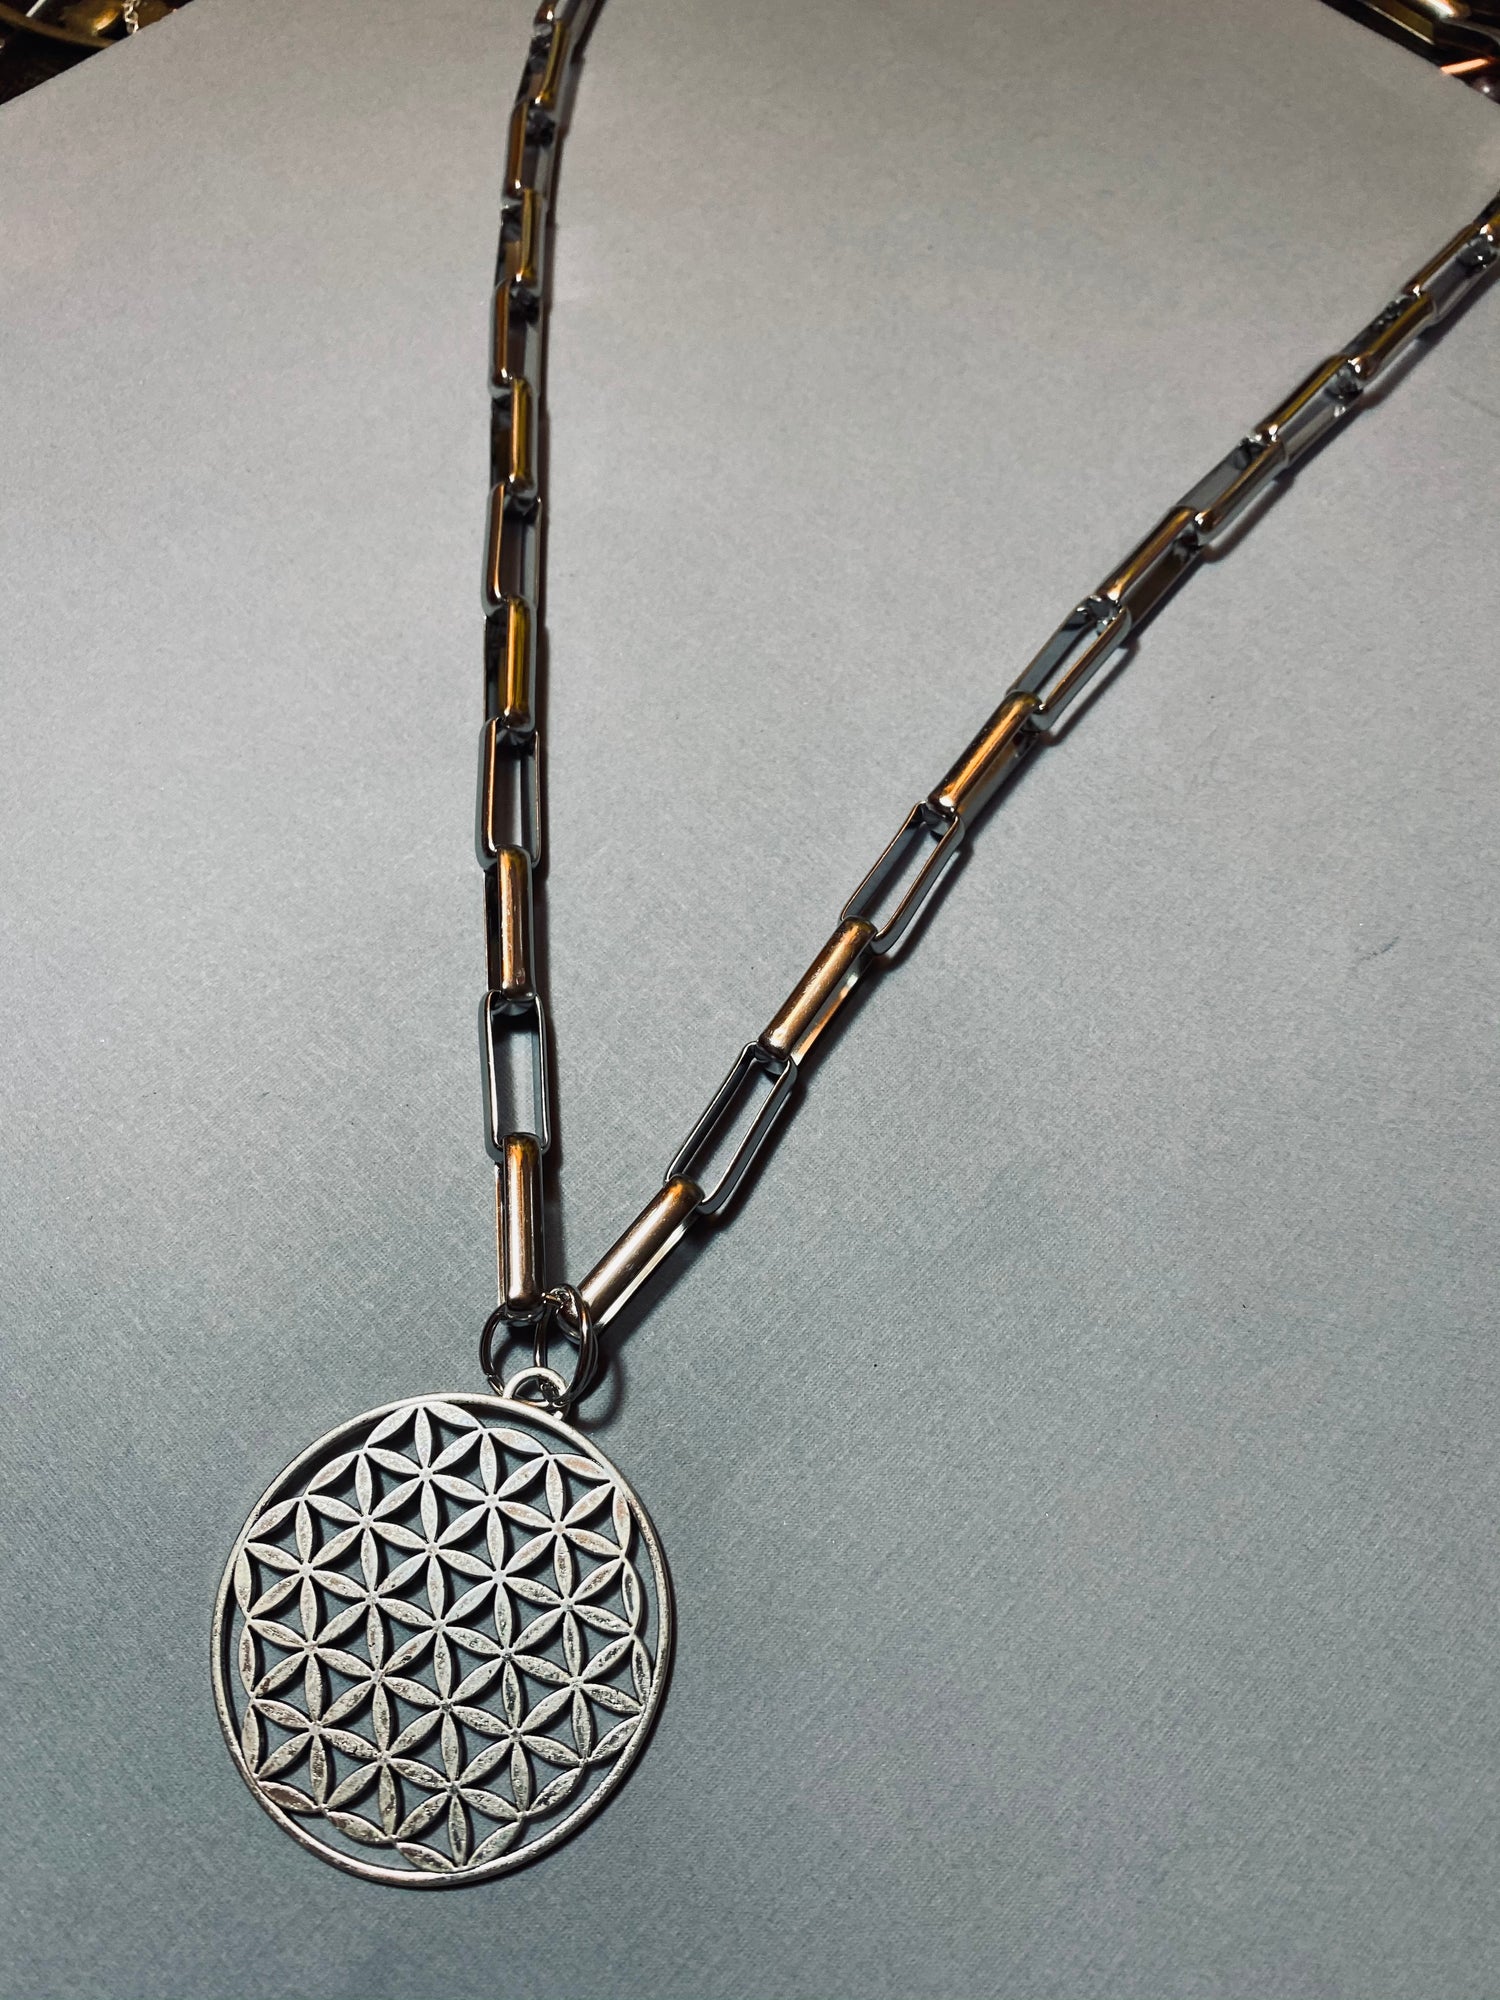 FLOWER OF LIFE ON BIKER CHAIN NECKLACE JEWELRY